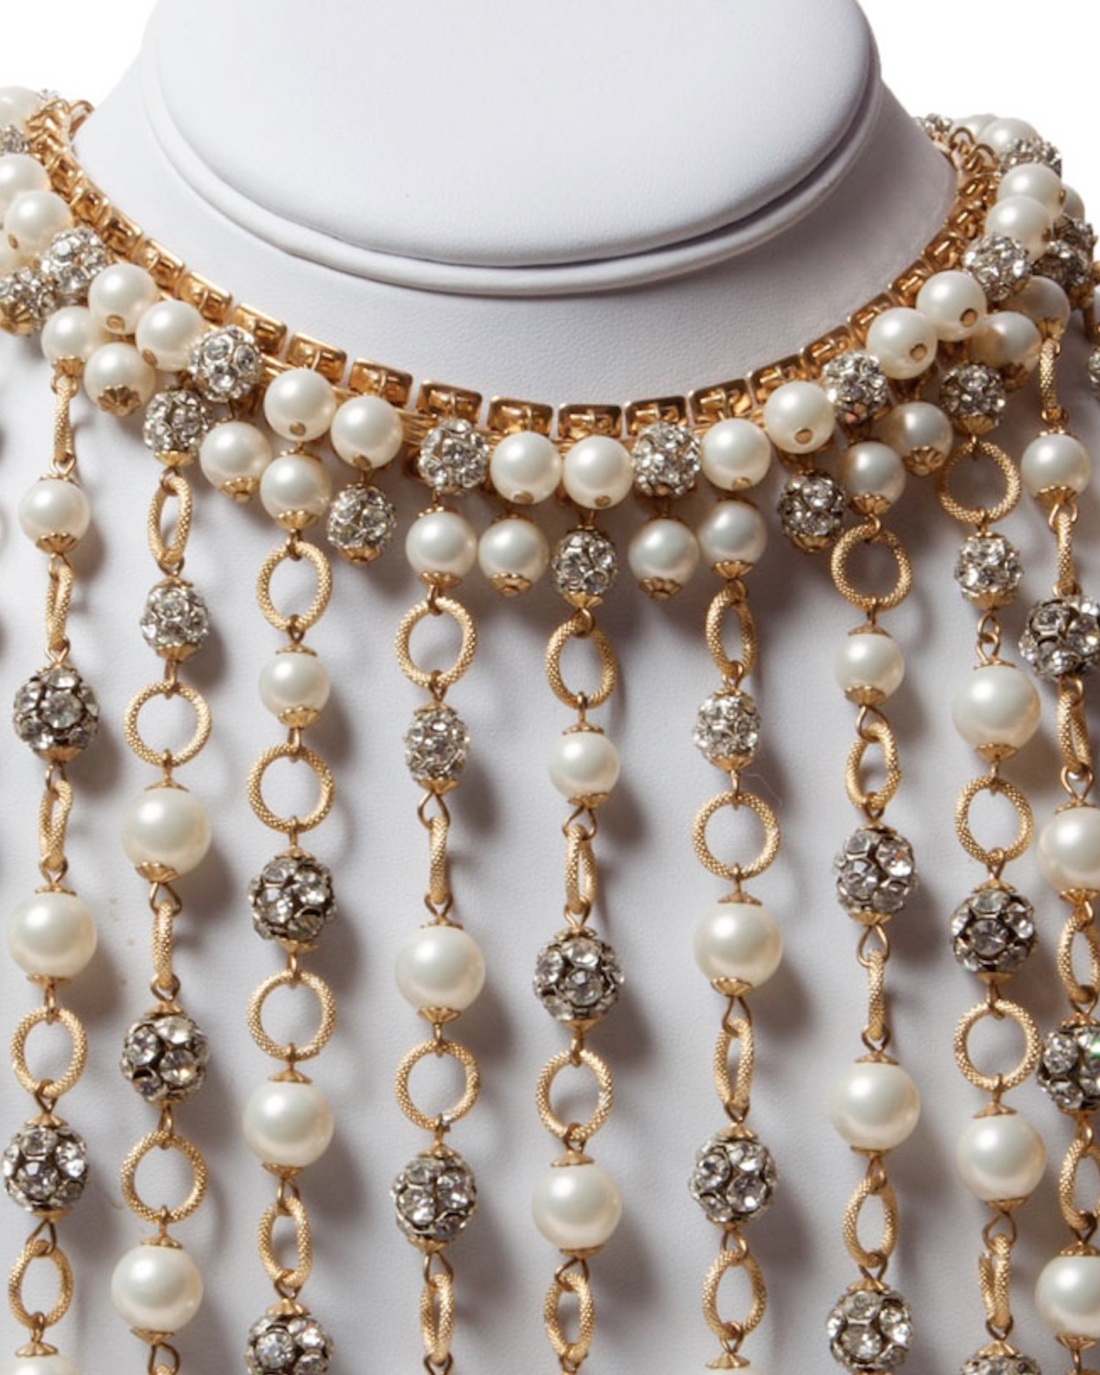 Pearl and Sparkling Crystal Ball Plunging Fringe Waterfall Necklace, circa 1950’s